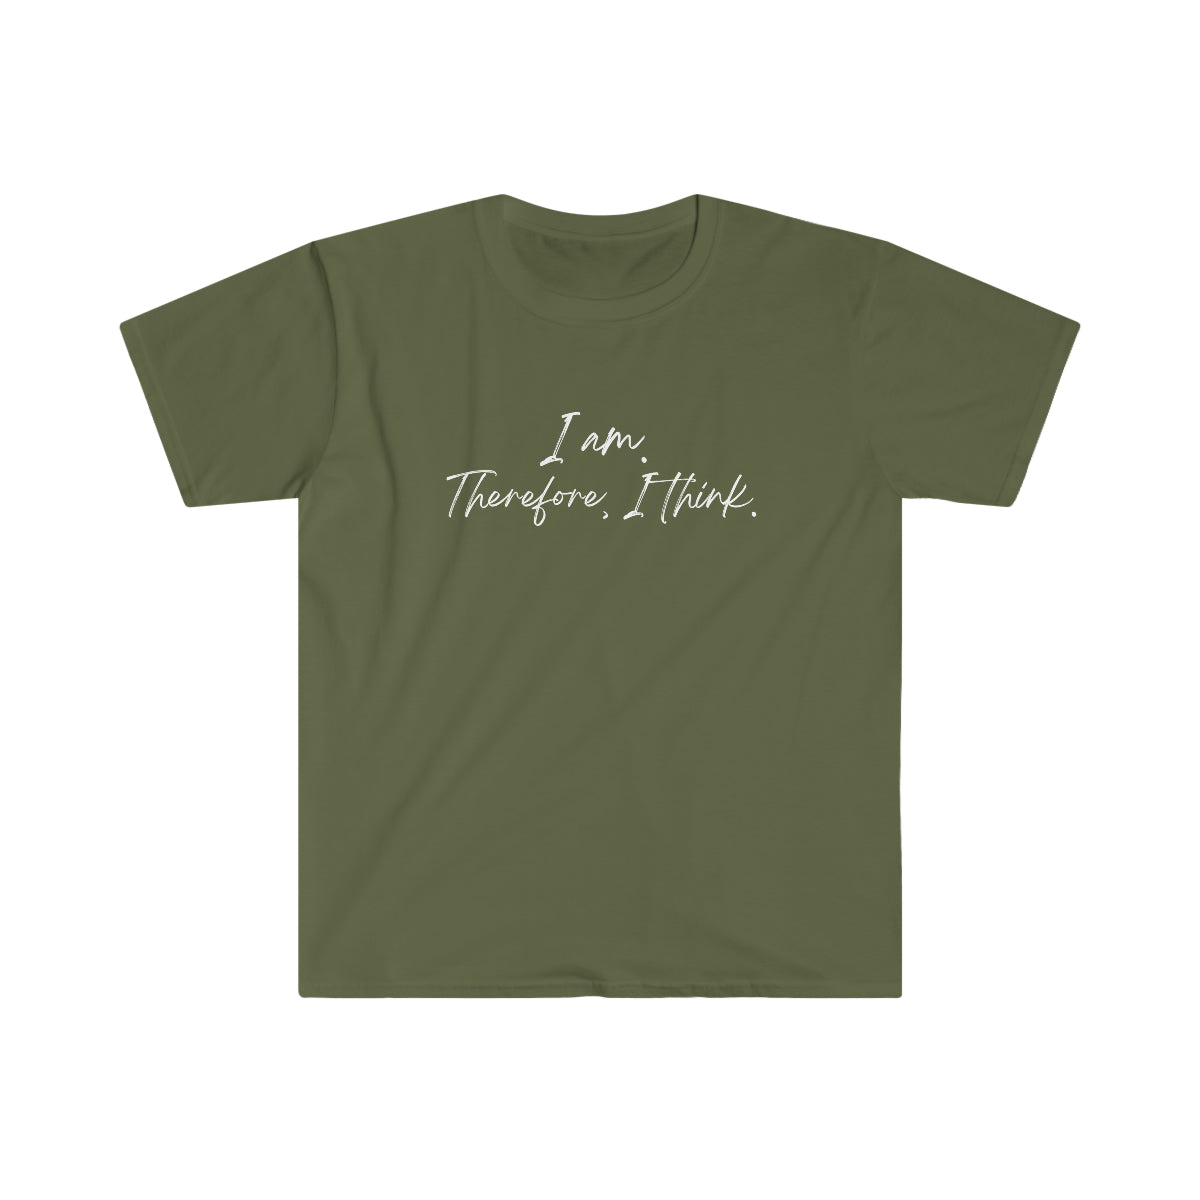 I am. Therefore, I think. Softstyle T-Shirt